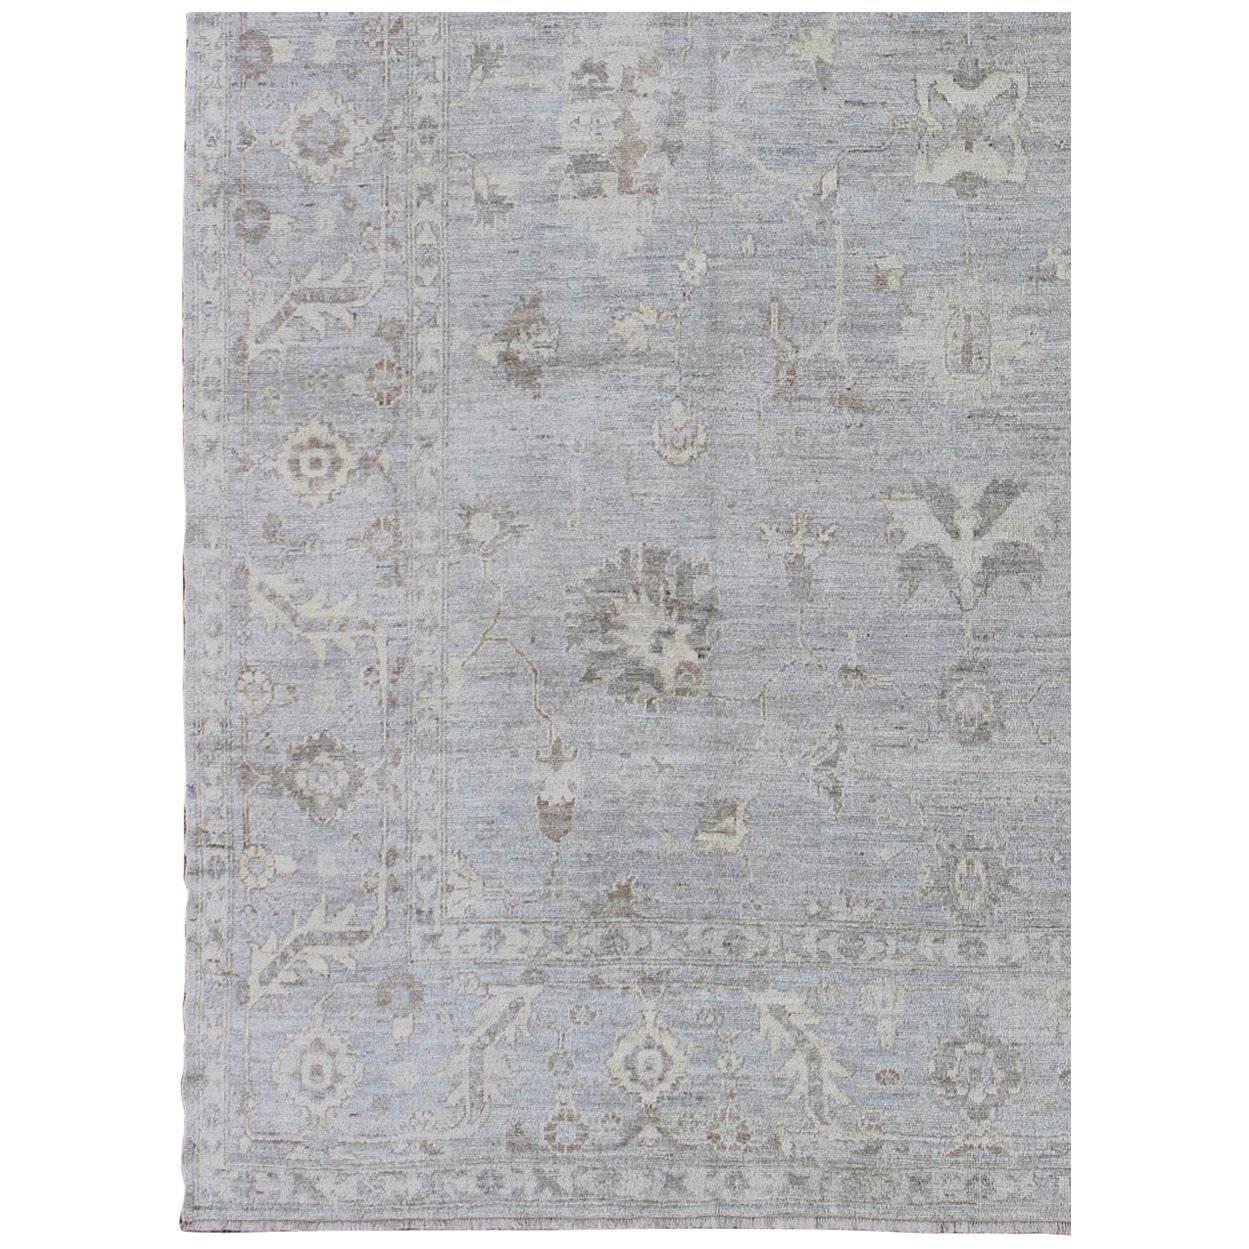 Made with a combination of angora wool and old wool, this magnificent Turkish Oushak boasts an all-over design in a large-scale style. The plentiful floral and bouquet motifs create an open design, which is surrounded by a border containing defined